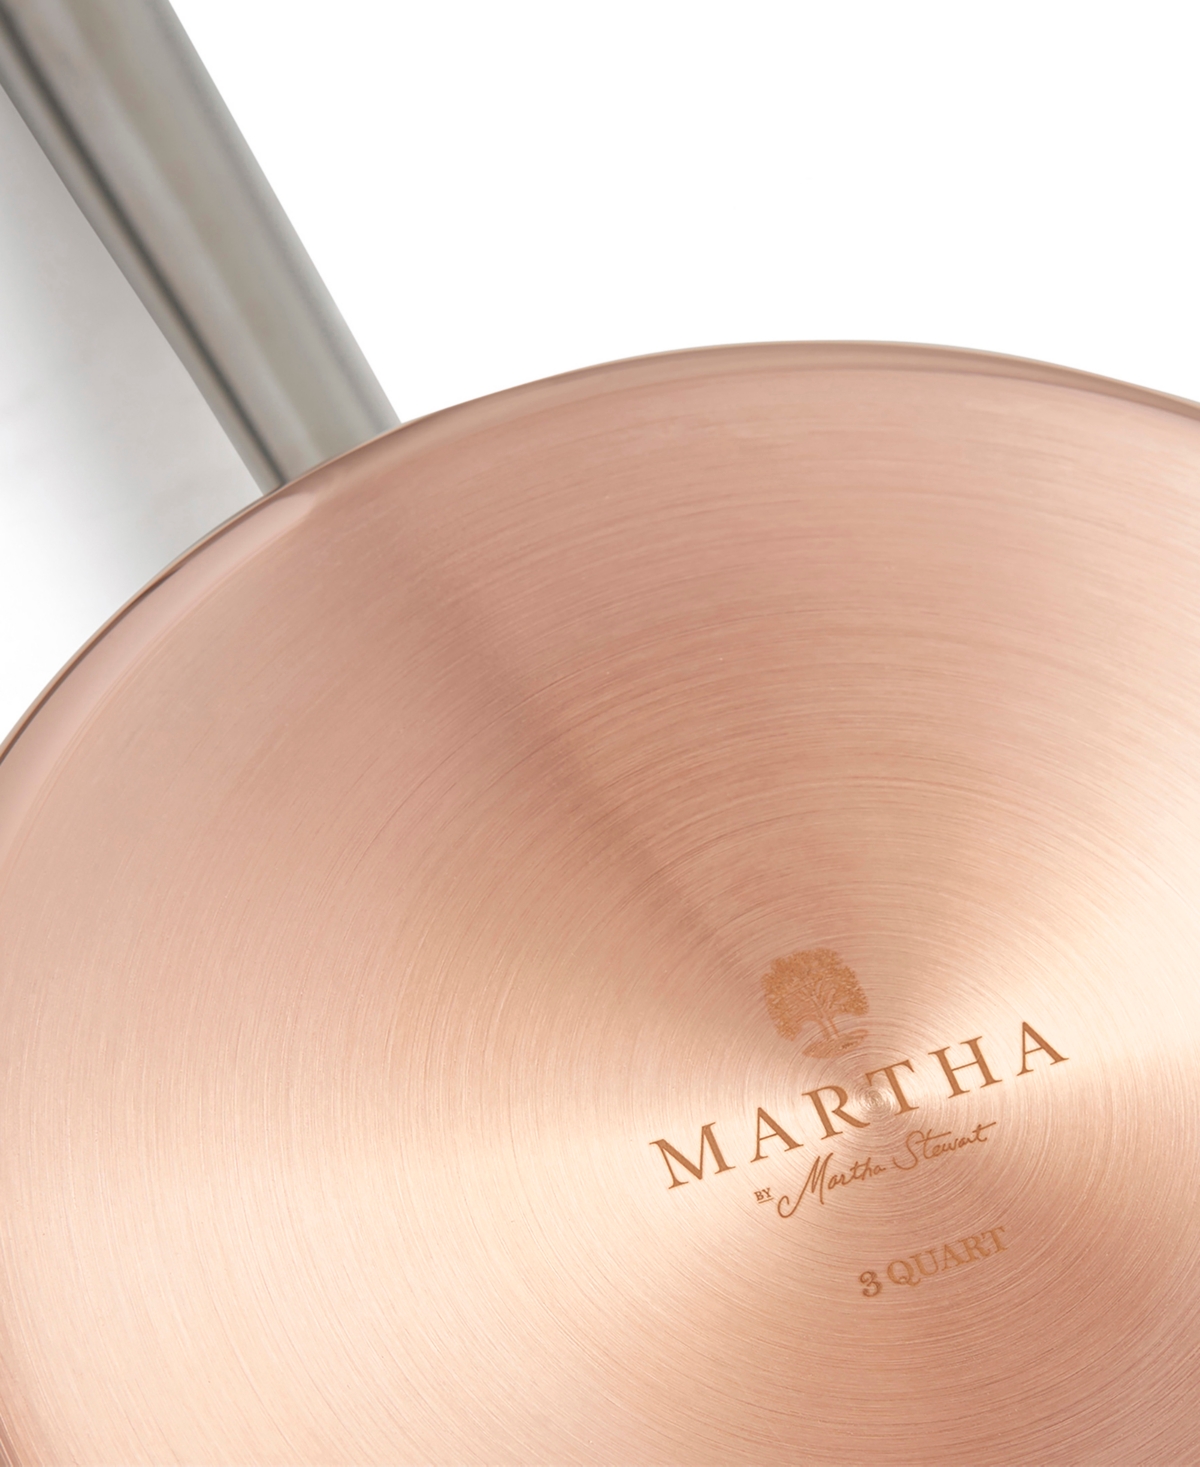 Shop Martha Stewart Collection Martha By Martha Stewart Stainless Steel 3 Qt Low Saucepan With Lid In Copper